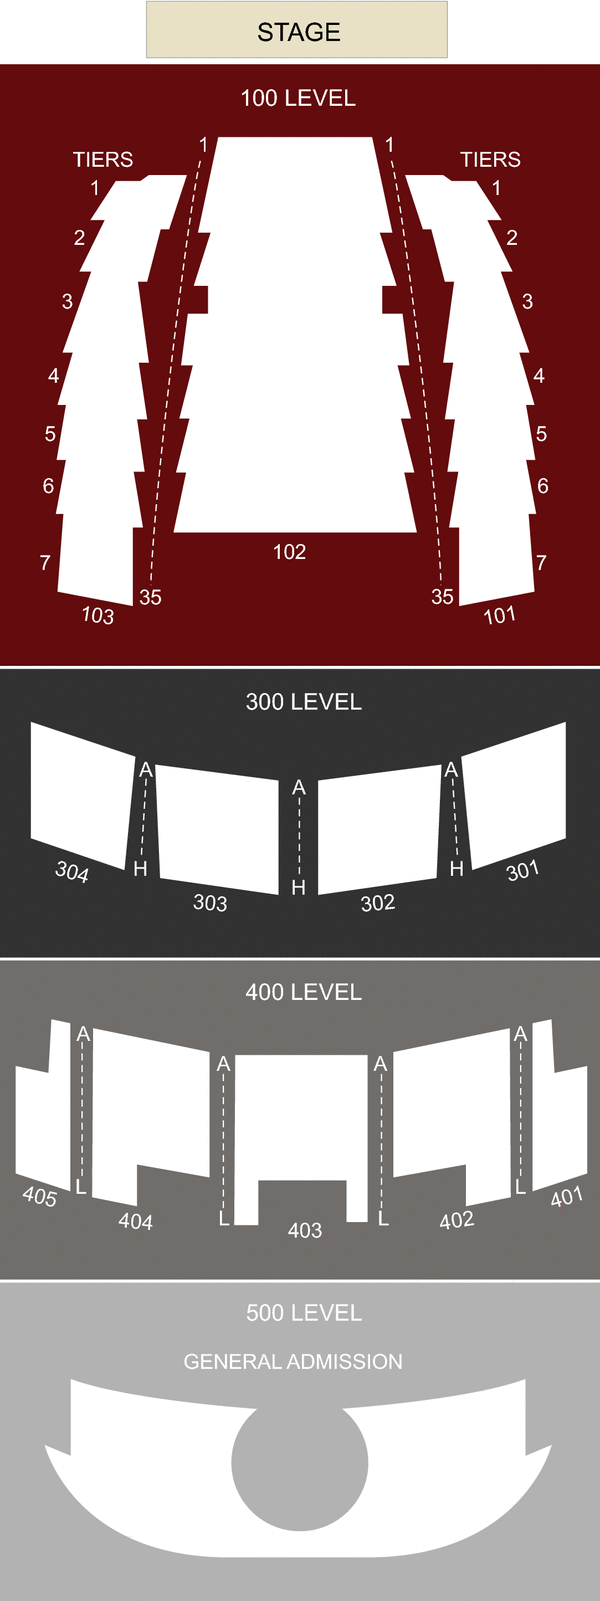 Midland By AMC Seating Chart